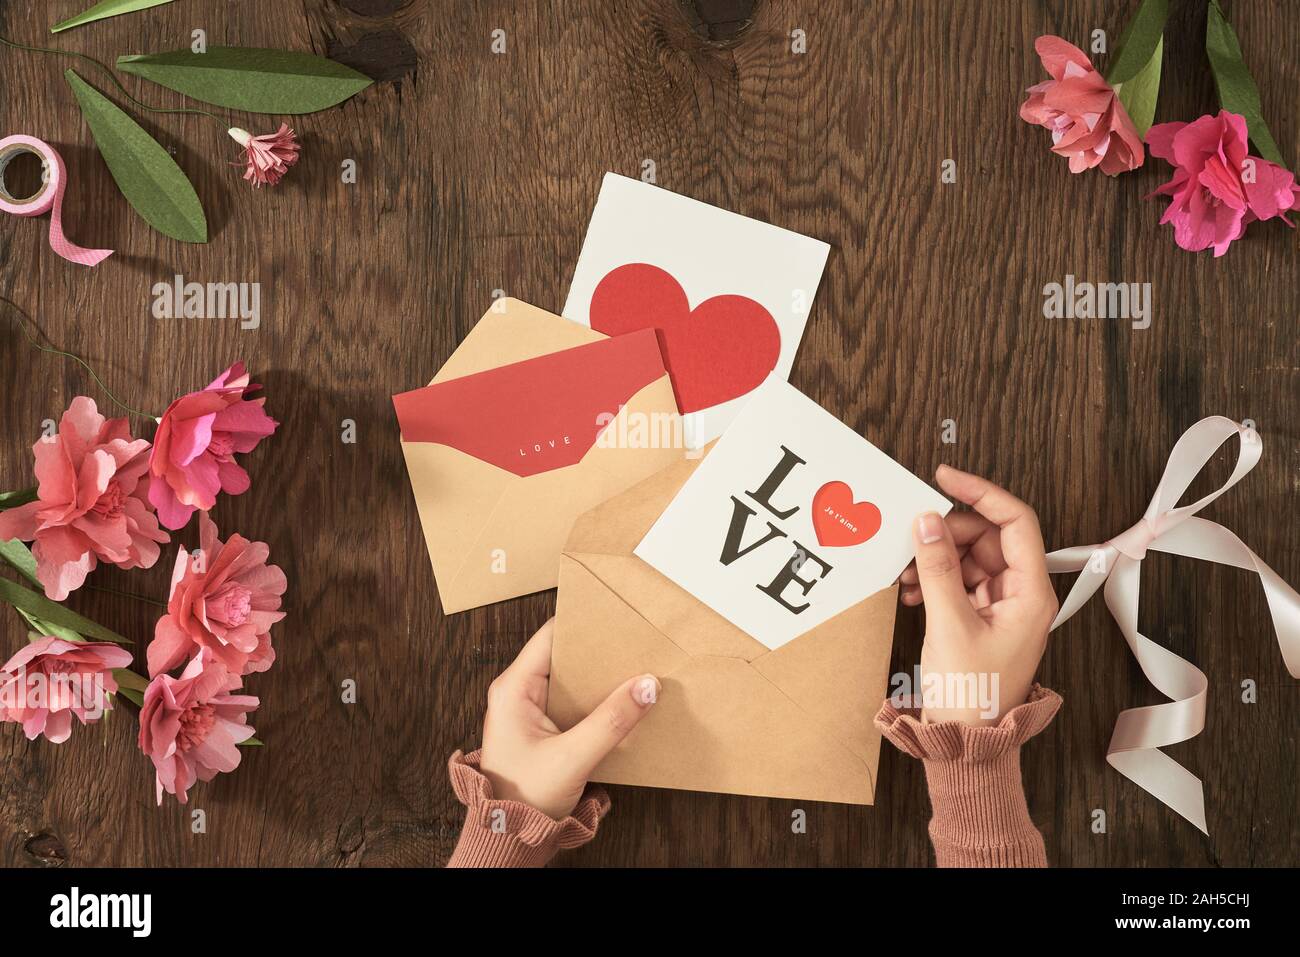 Valentine card on wood background with color paper flowers, ribbon. Flatlay, top view. Stock Photo